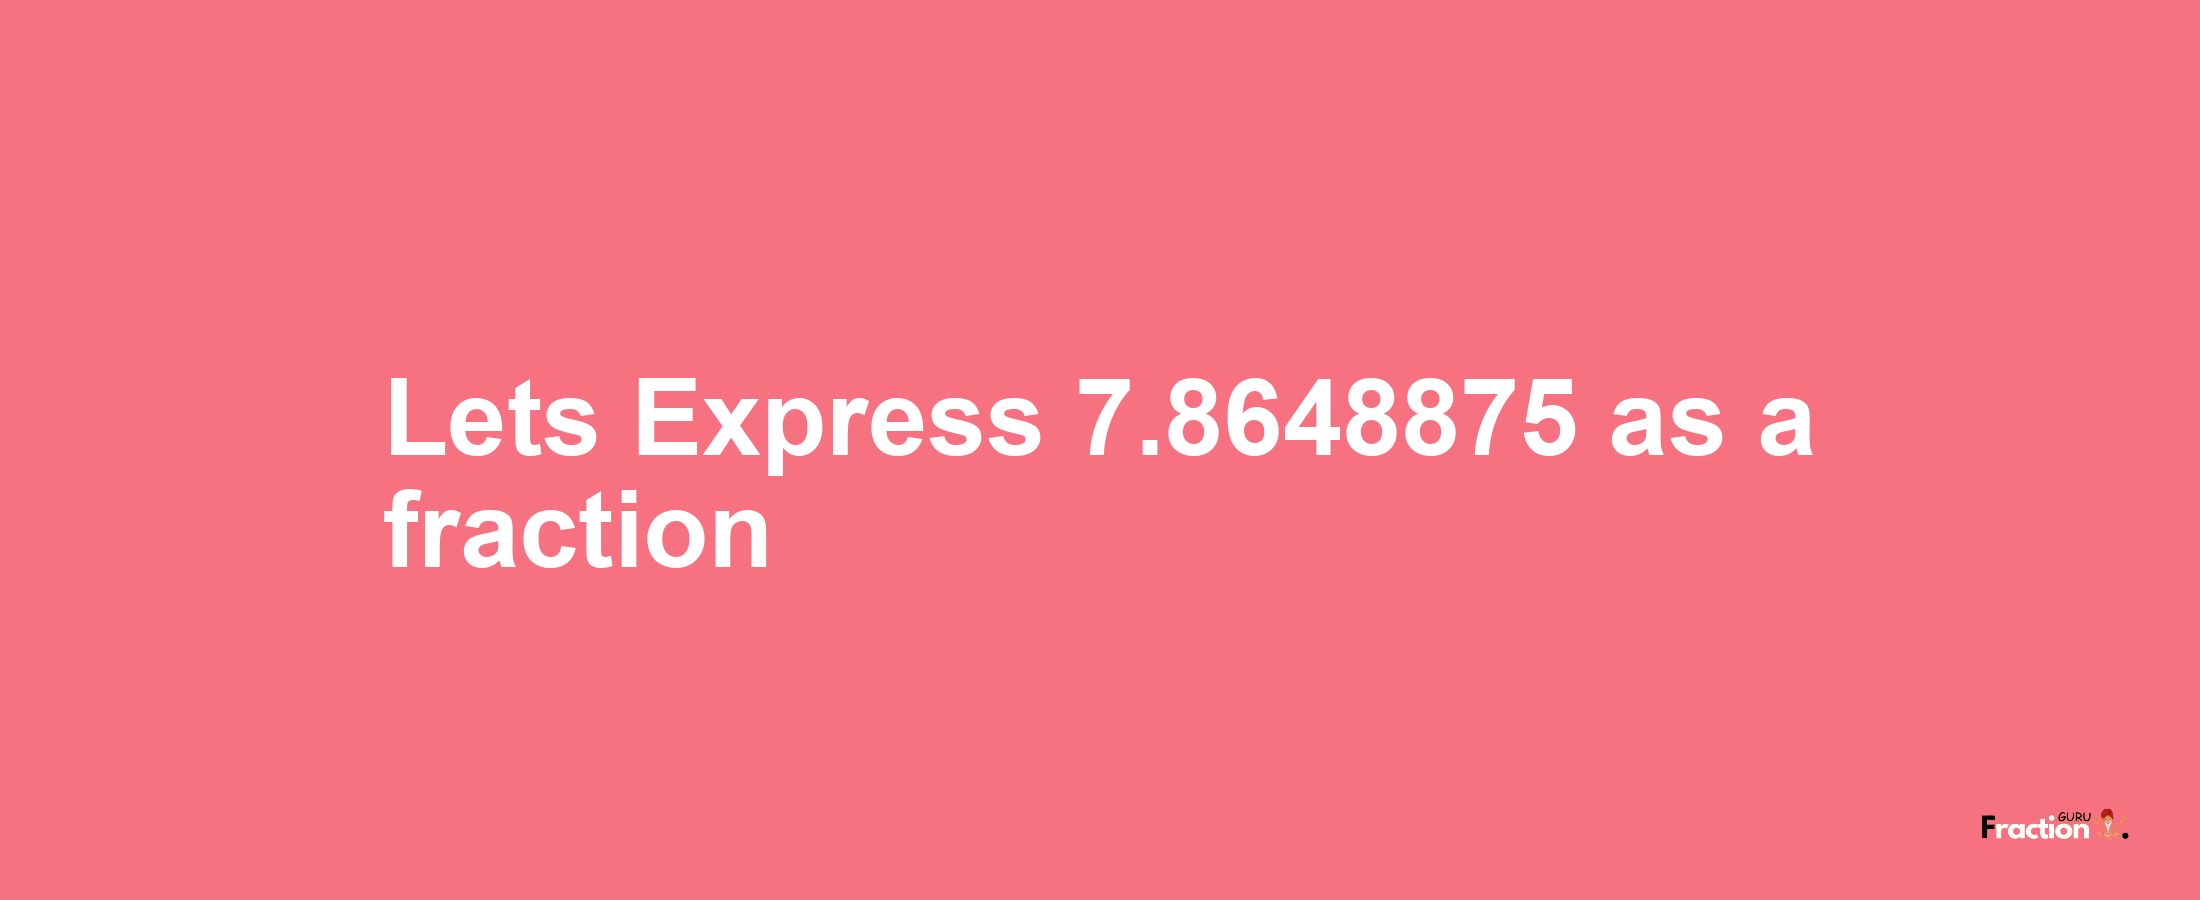 Lets Express 7.8648875 as afraction